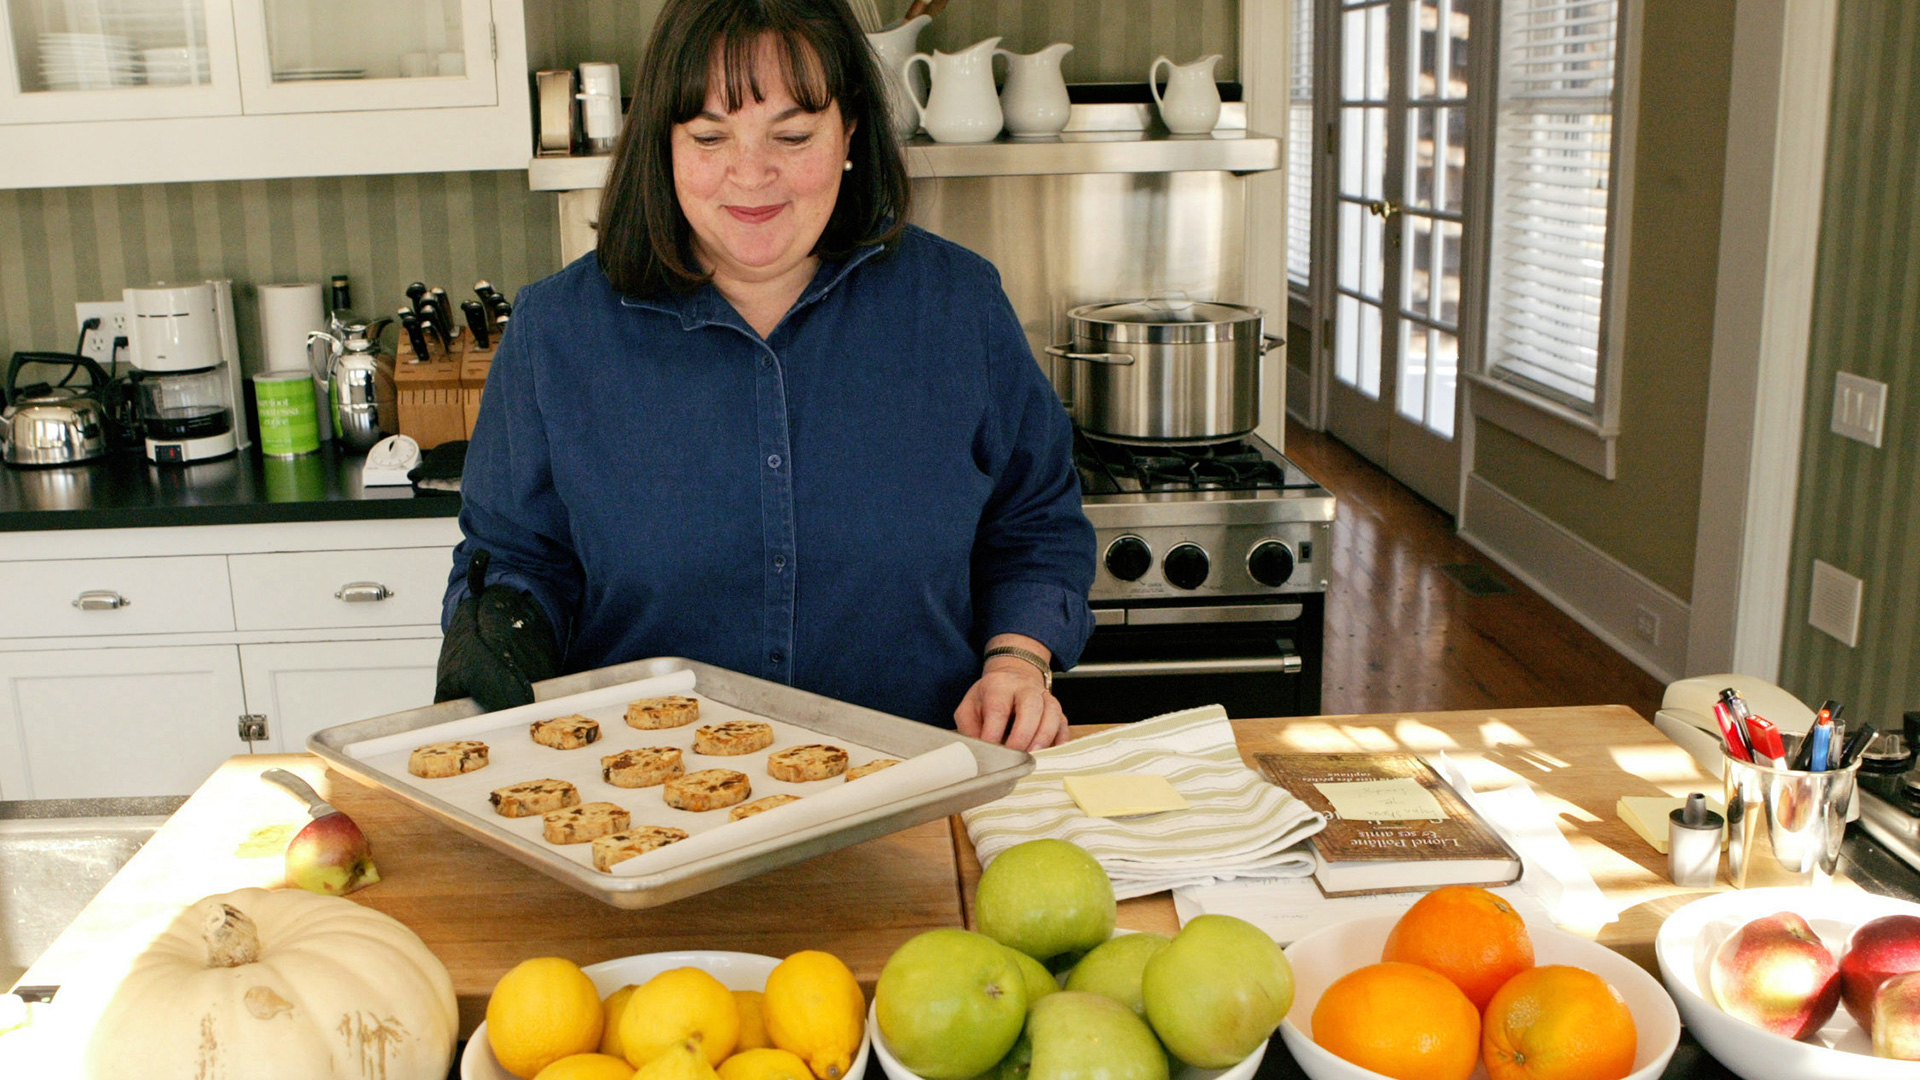 November 30, 2002: “Barefoot Contessa” Premiered on the Food Network